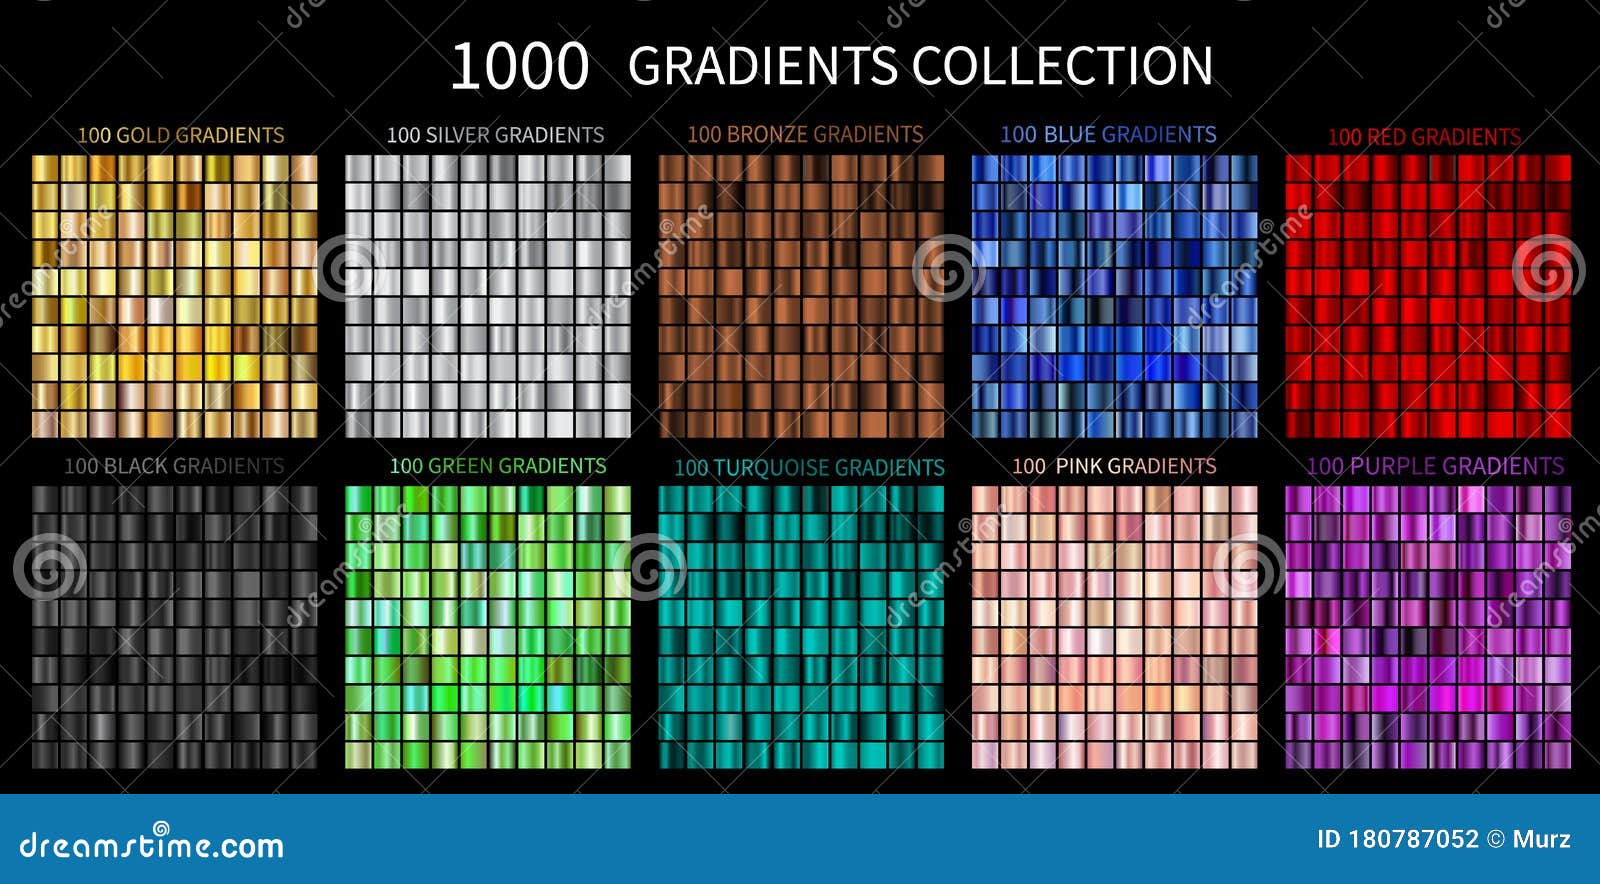 gradients  megaset big collection of metallic gradients 1000 glossy colors backgrounds